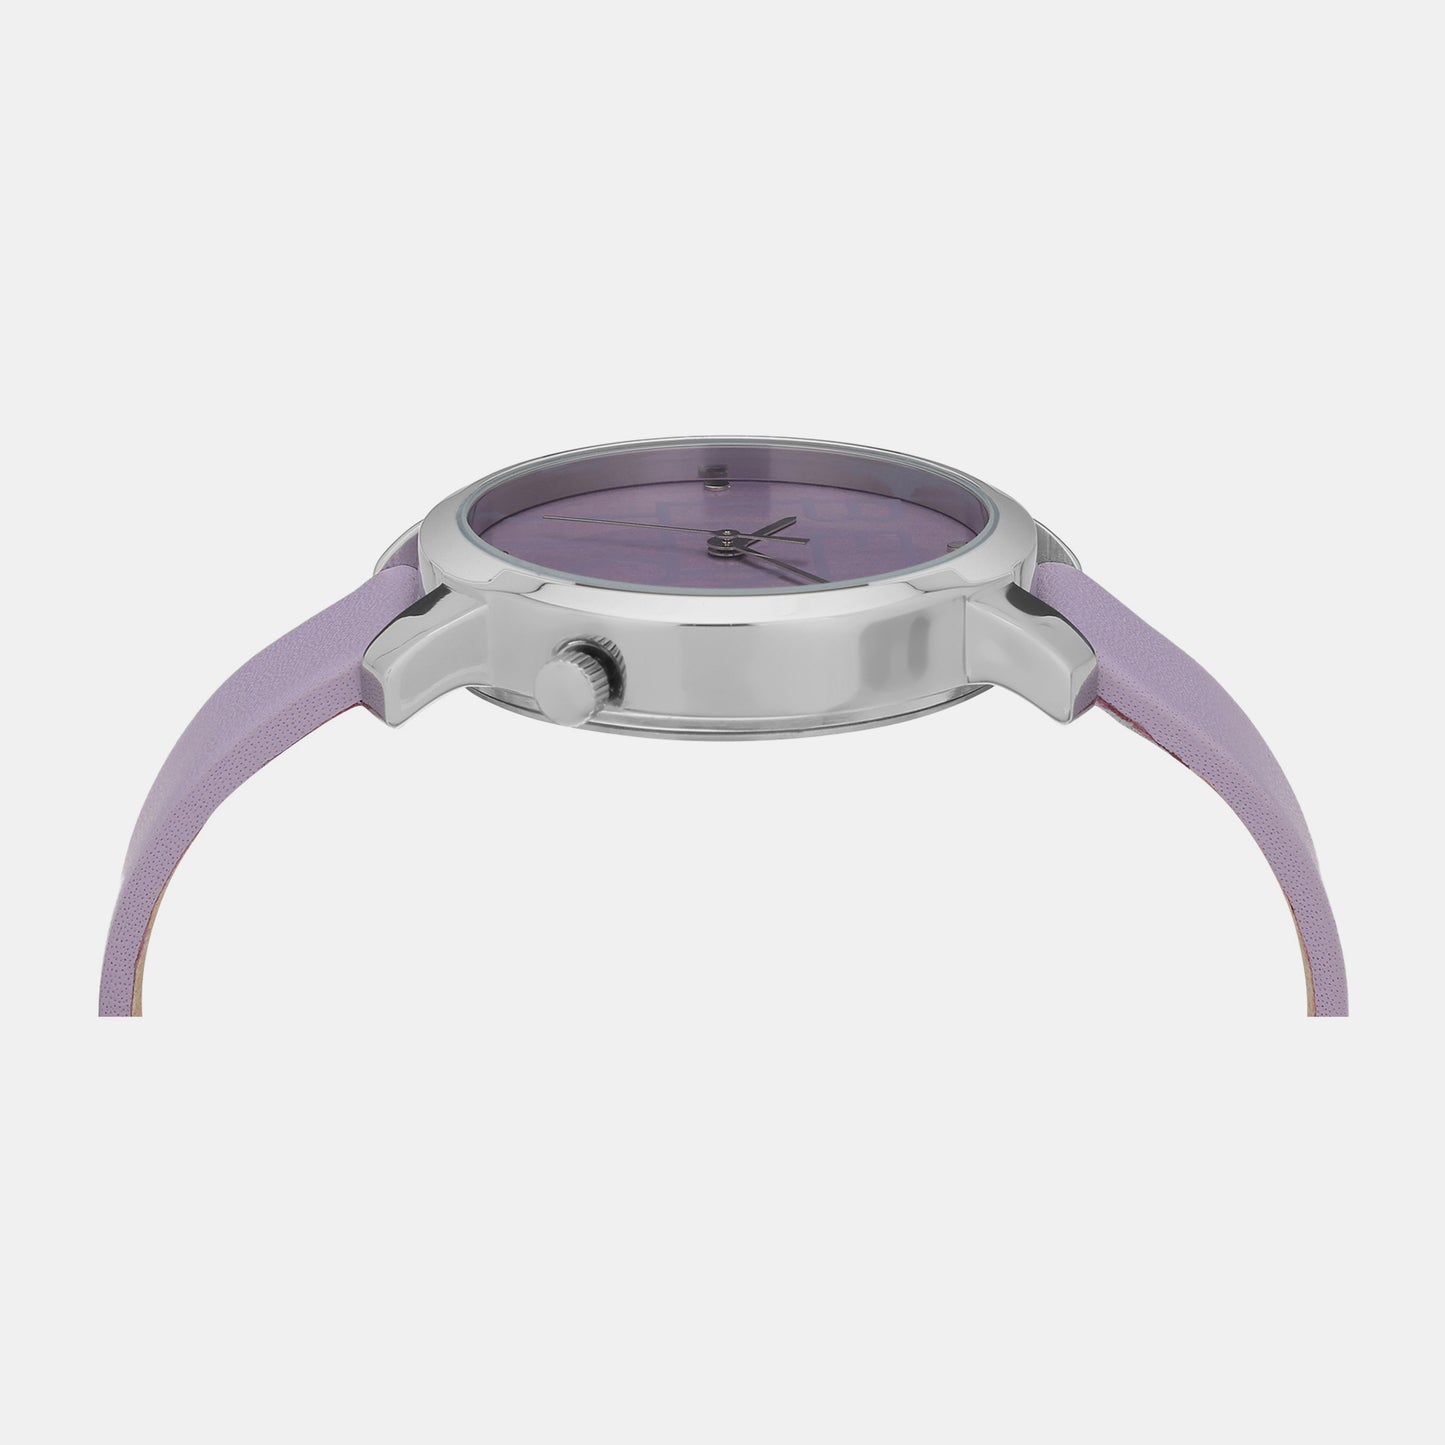 Iconic Lavender Female 3 Hands Analog Leather Watch UWUCL0705